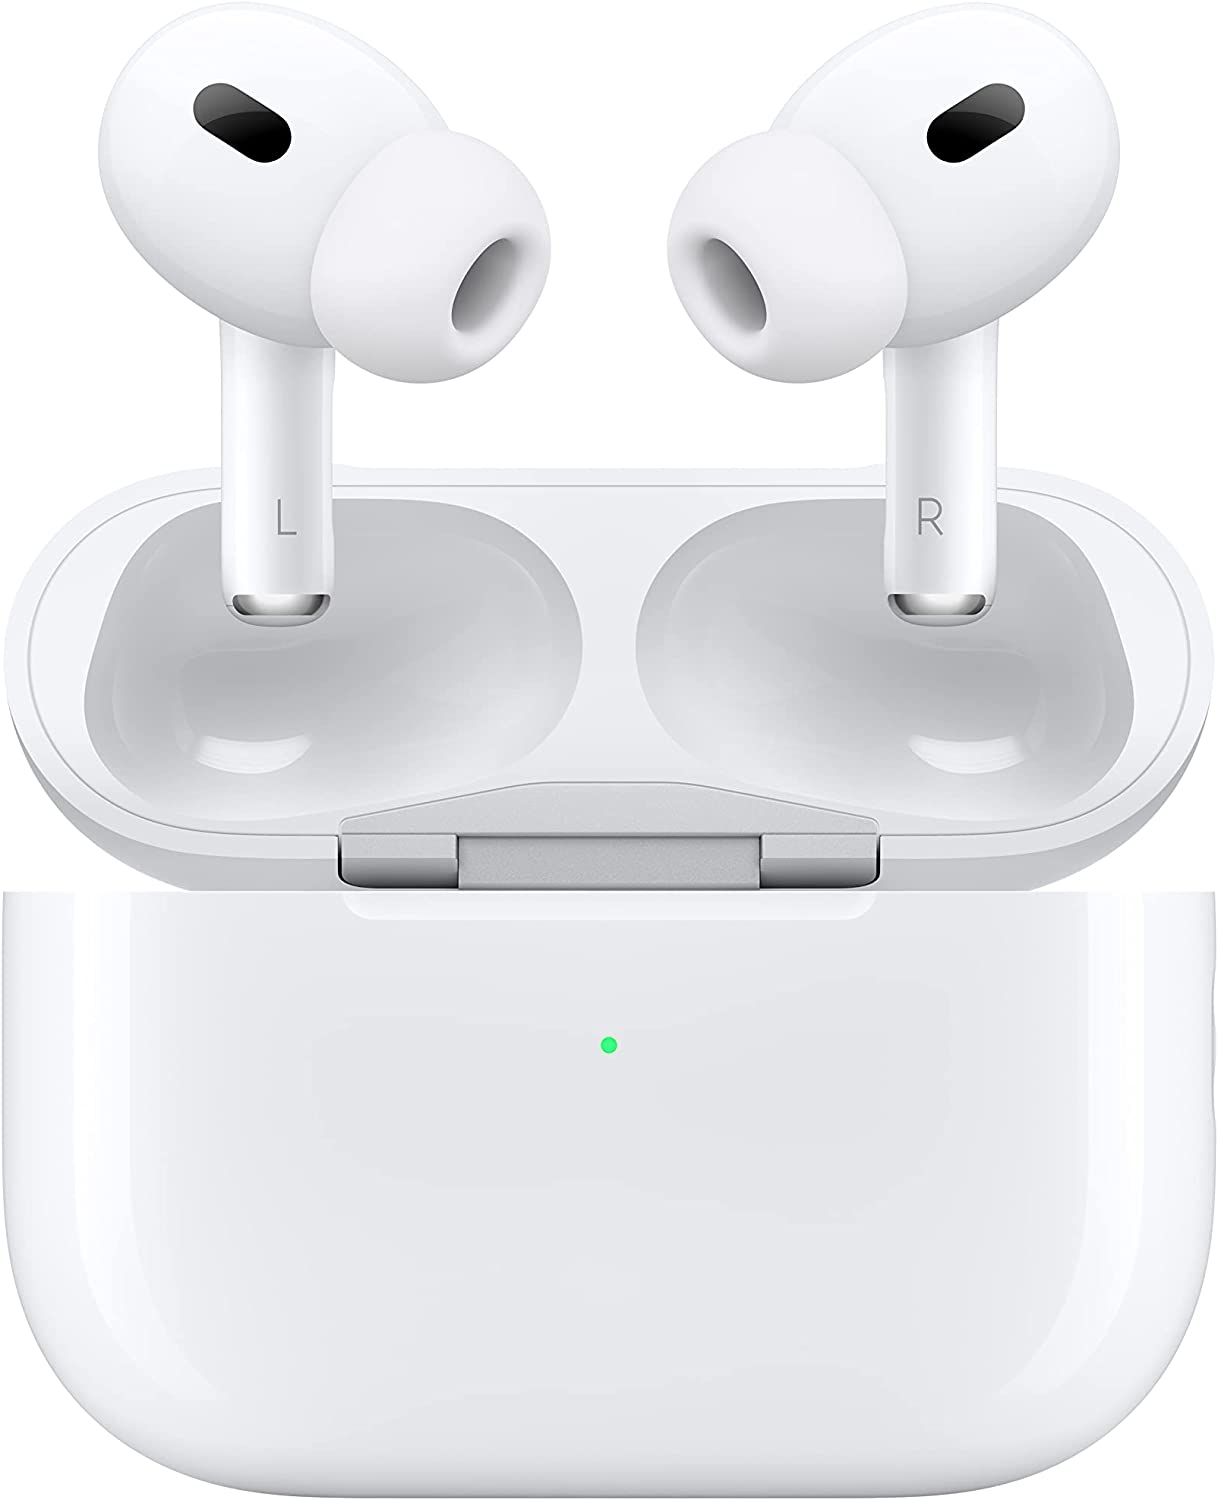 Review of the second-generation Apple AirPods